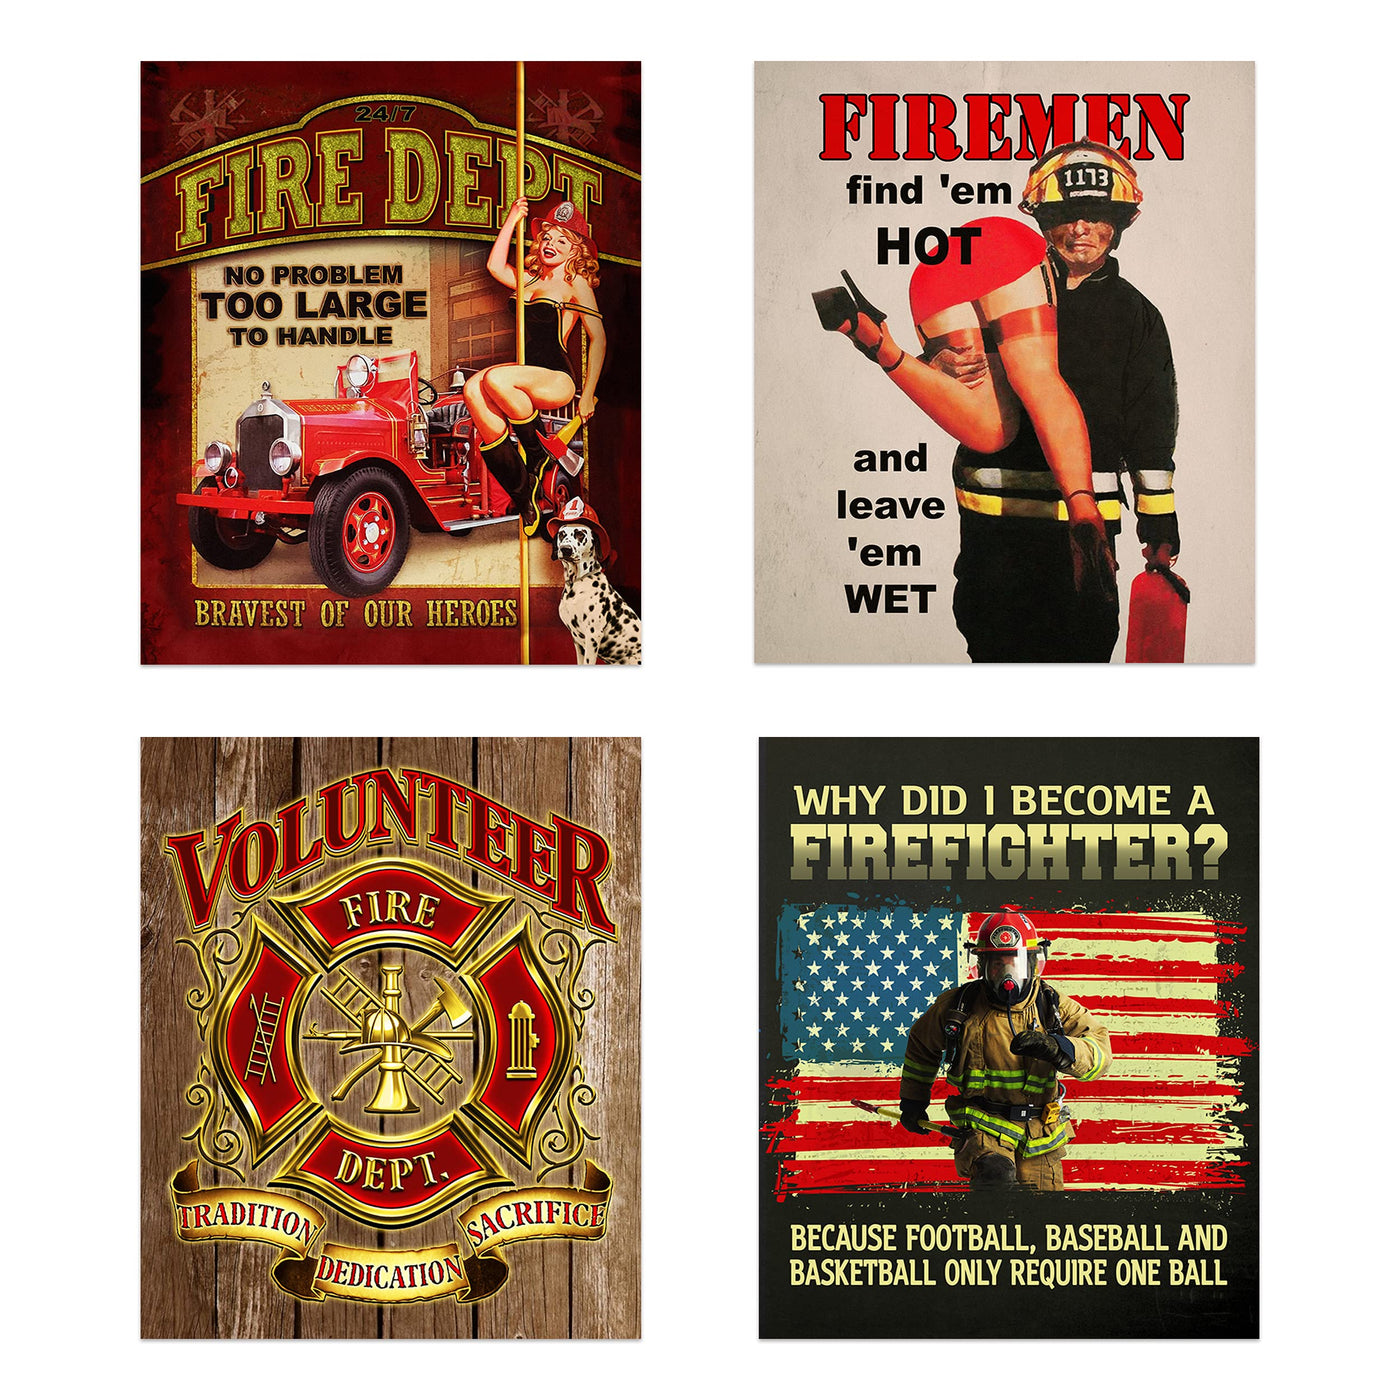 Fire Department Vintage Signs- 4 Image Set- 8 x10"s Wall Decor Prints- Ready To Frame. Great Gift for All Firemen- Home Decor- Office Decor. Perfect for Man Cave- Bar- Garage-Fire Stations!